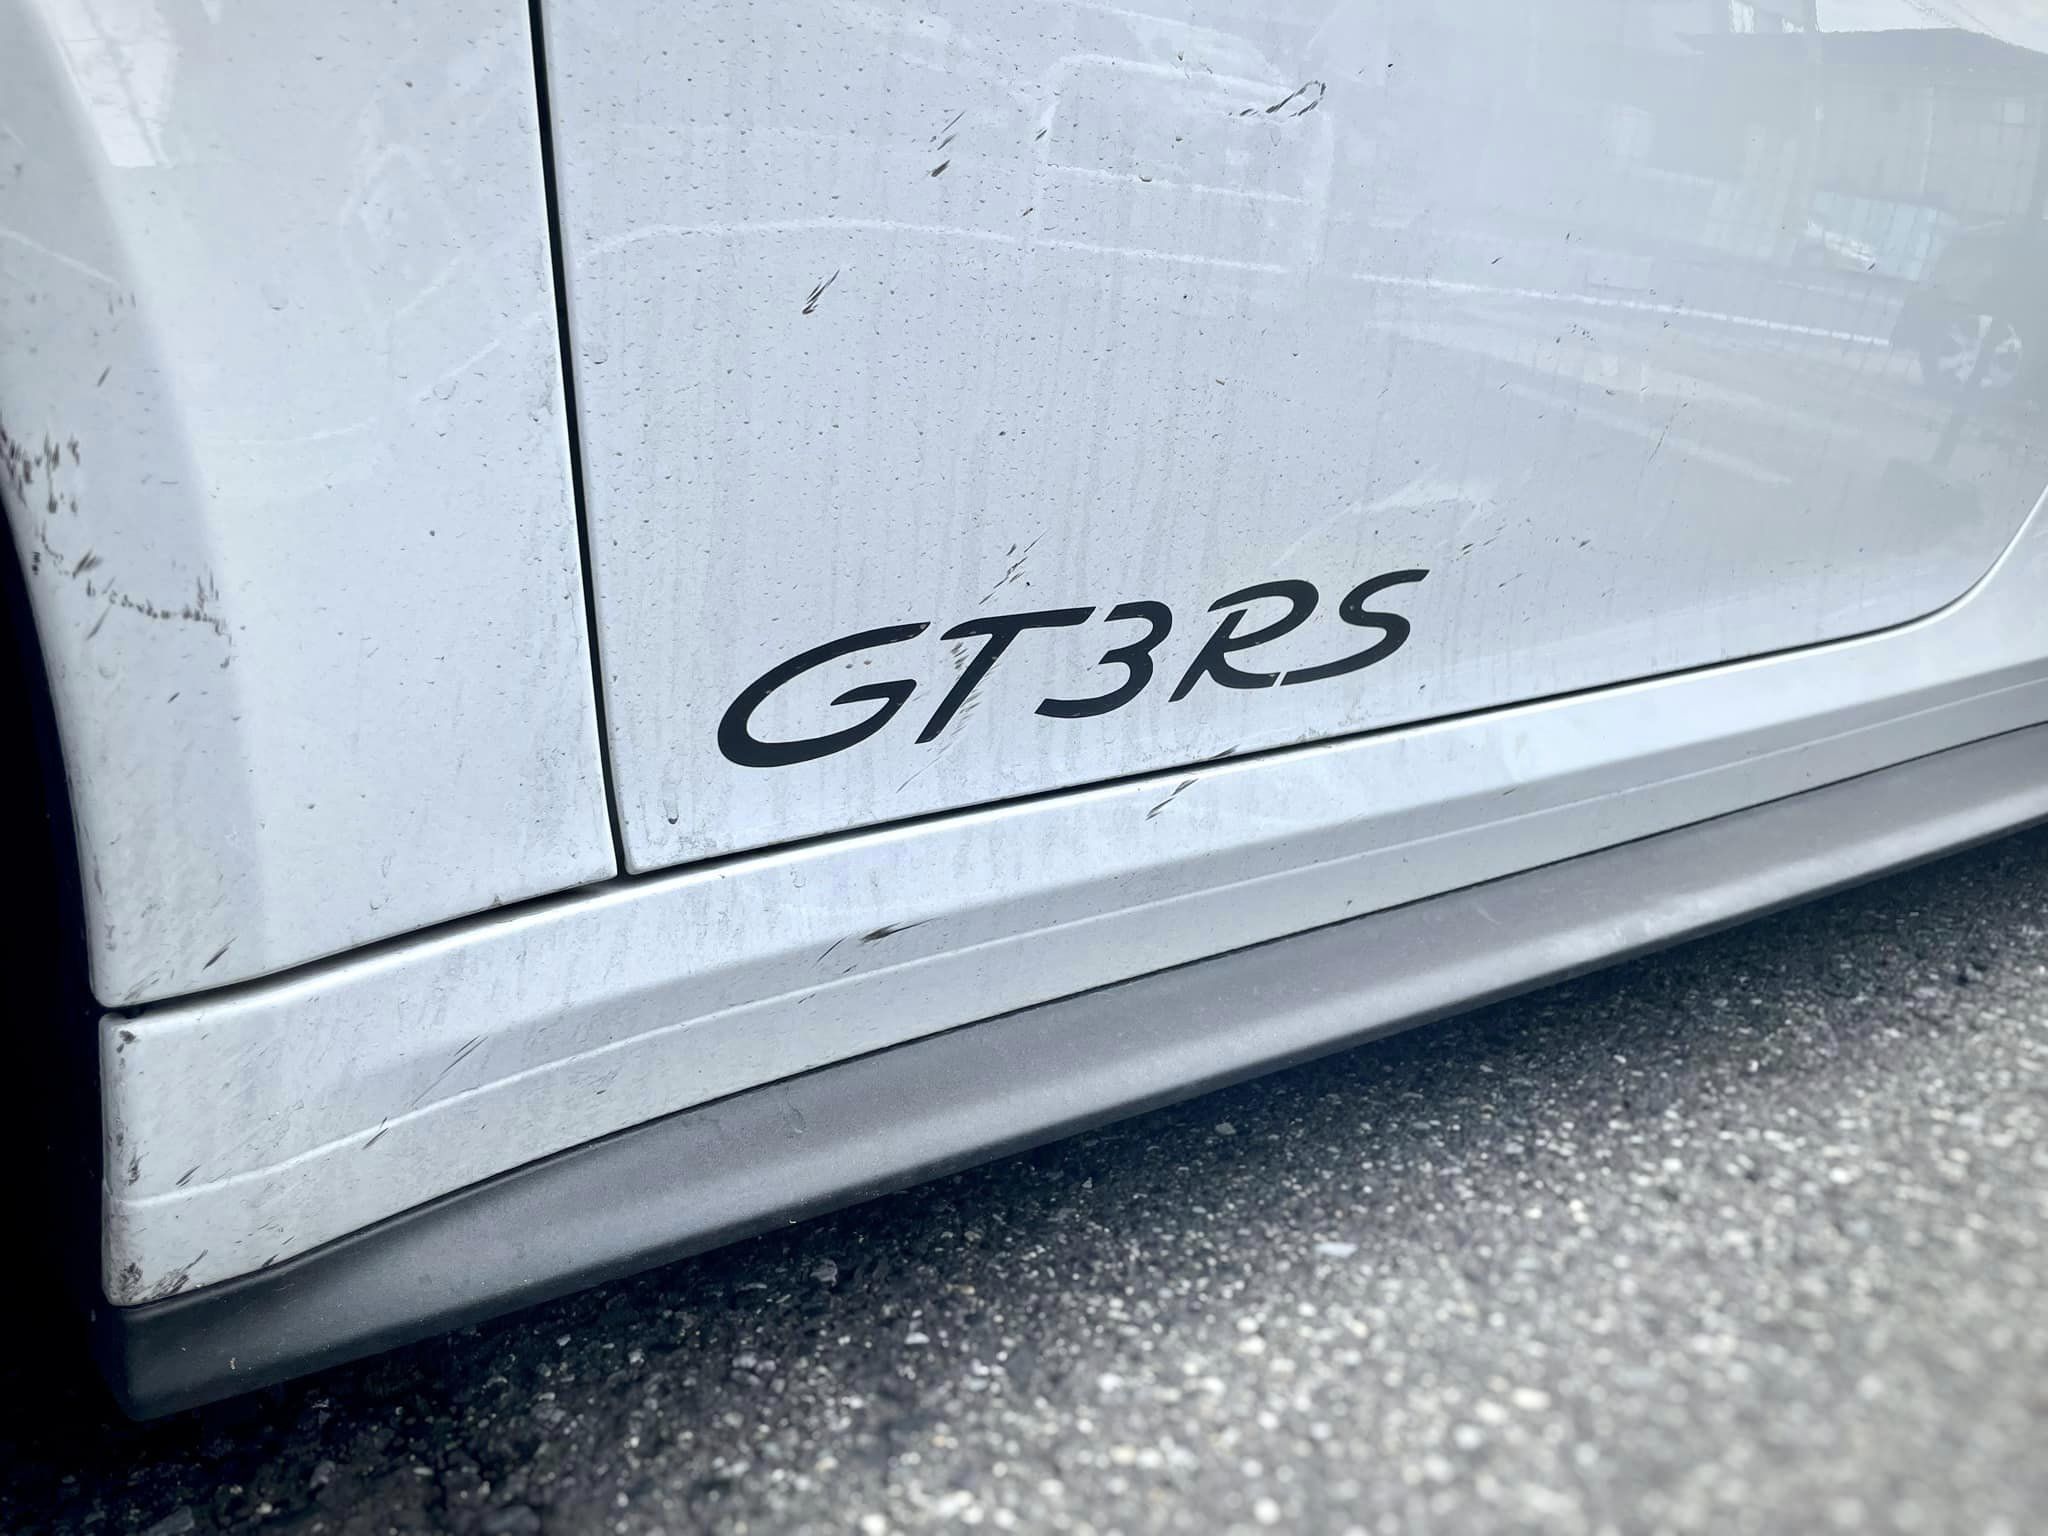 991 GT3RS DME現車あわせチューニング！